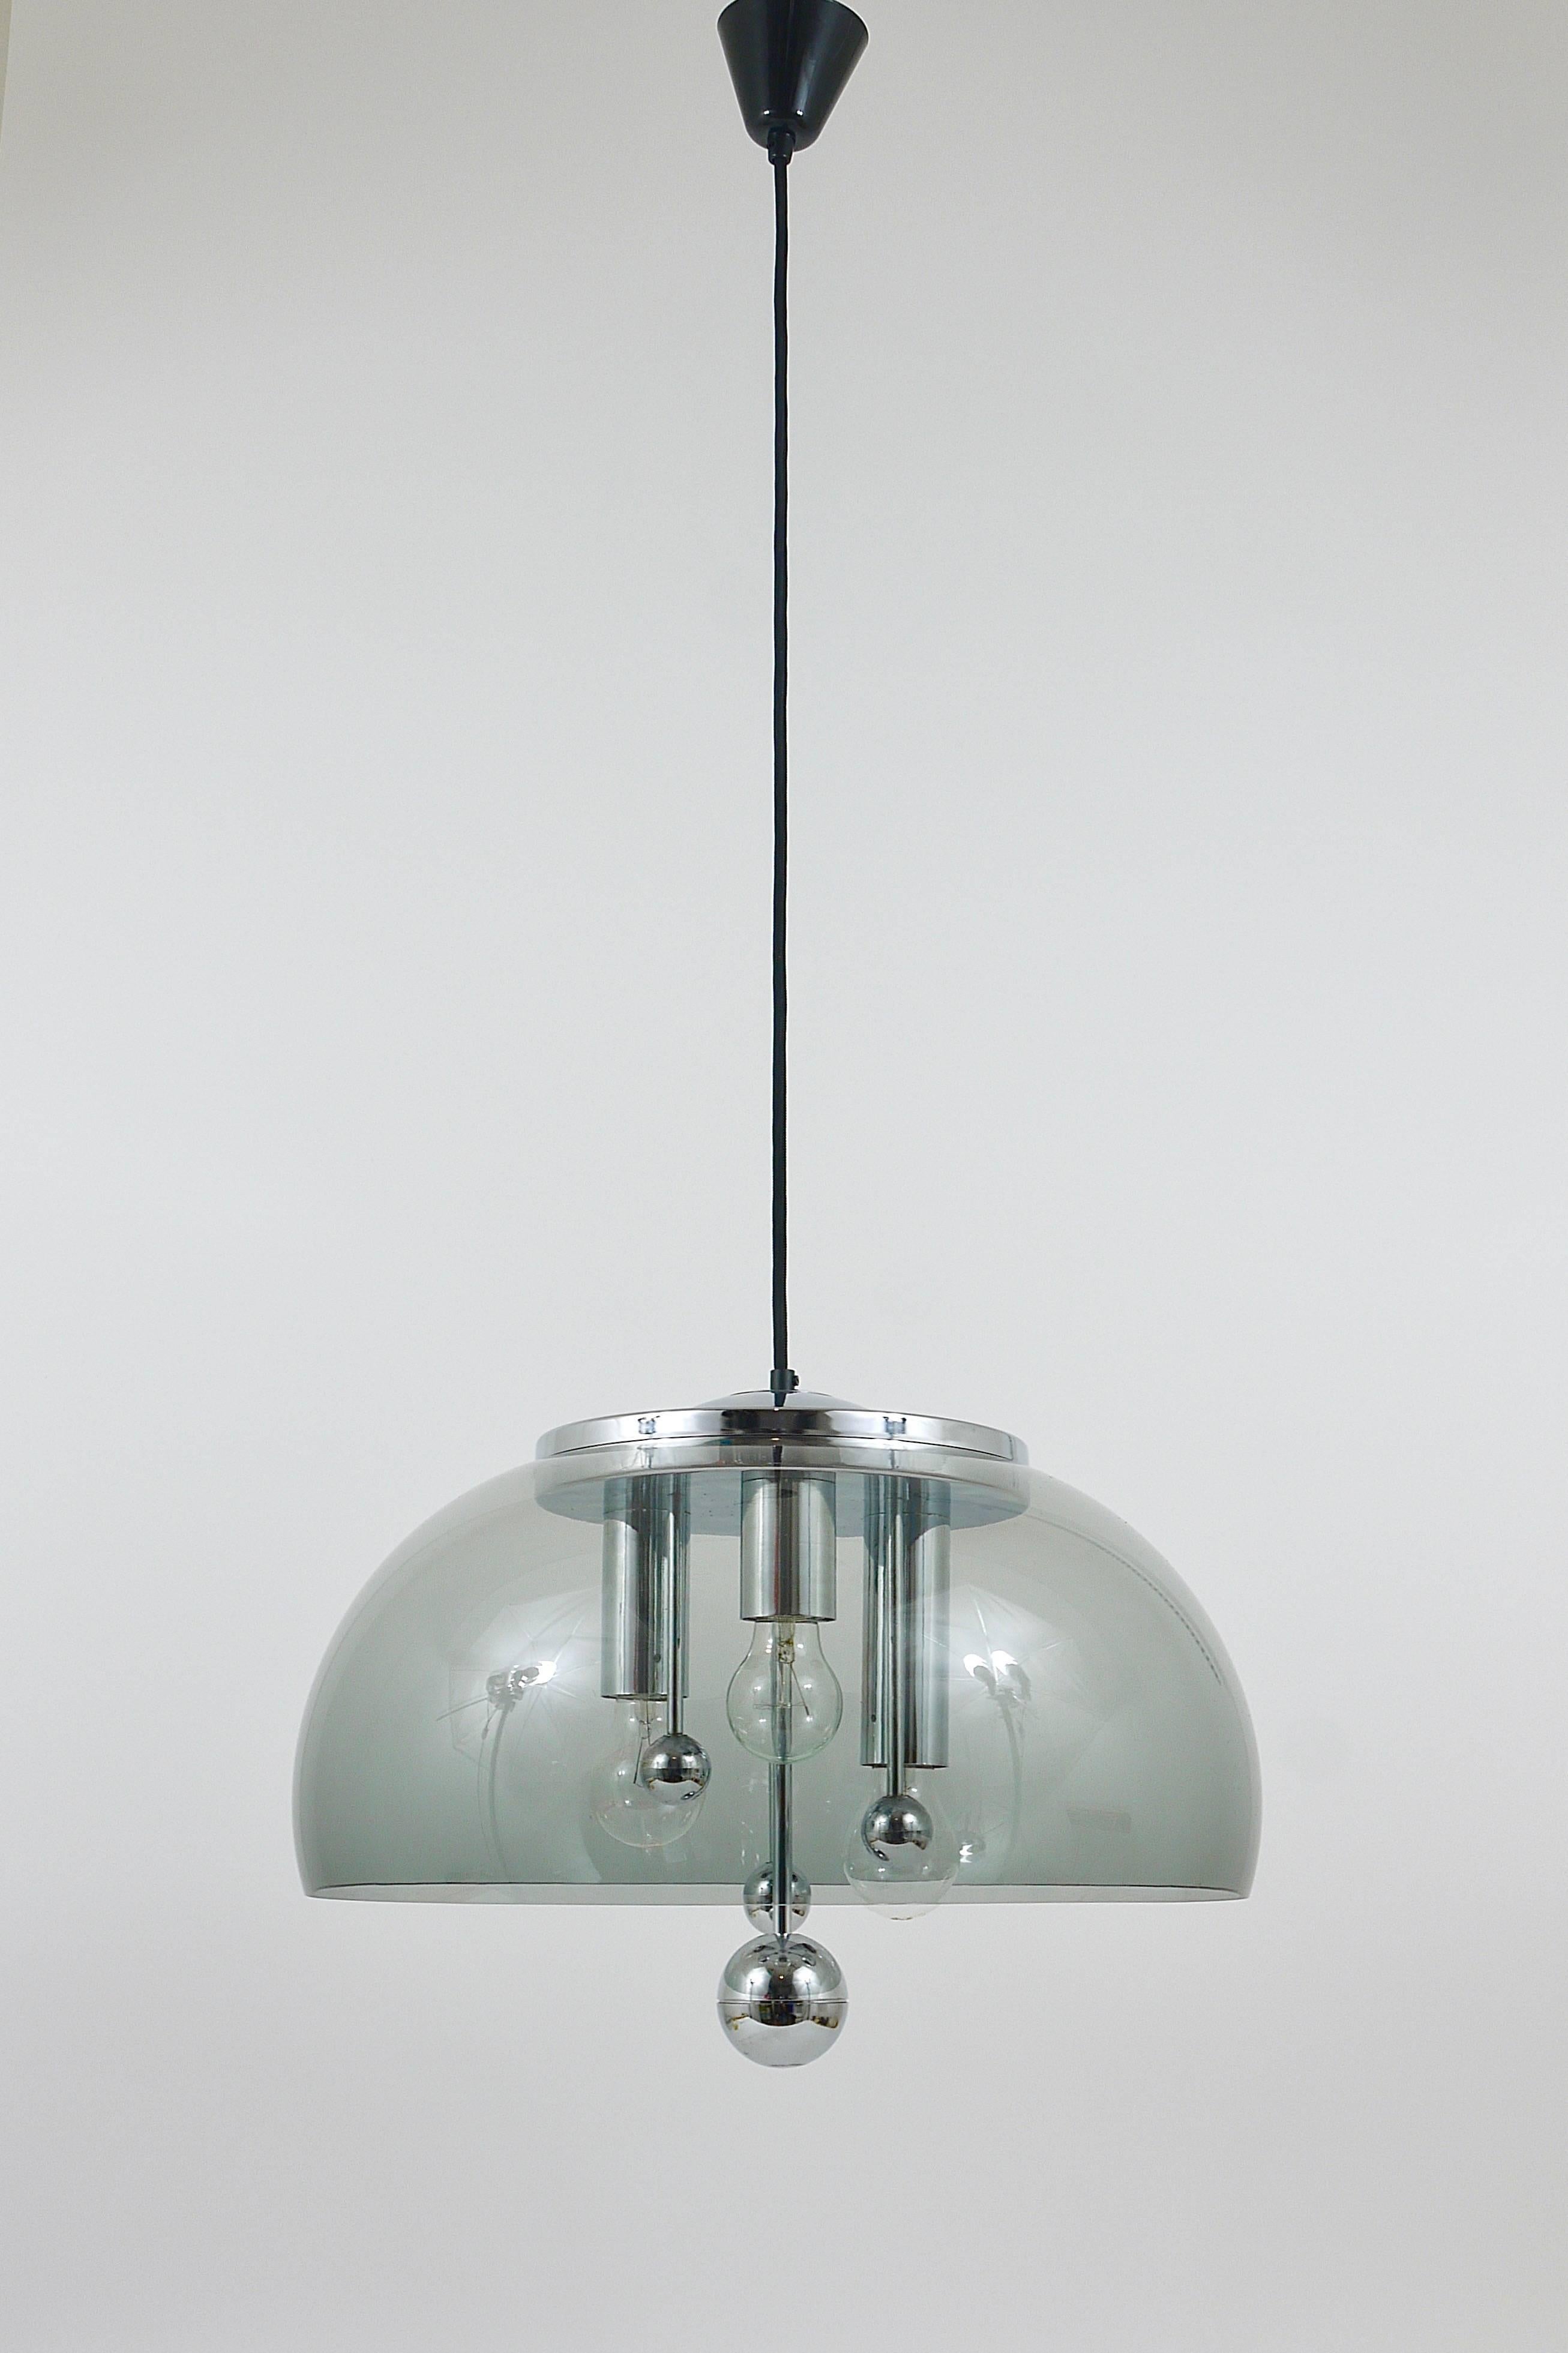 Mid-Century Modern Midcentury Space Age Globe Pendant Lamp with Chromed Spheres, Germany, 1970s For Sale